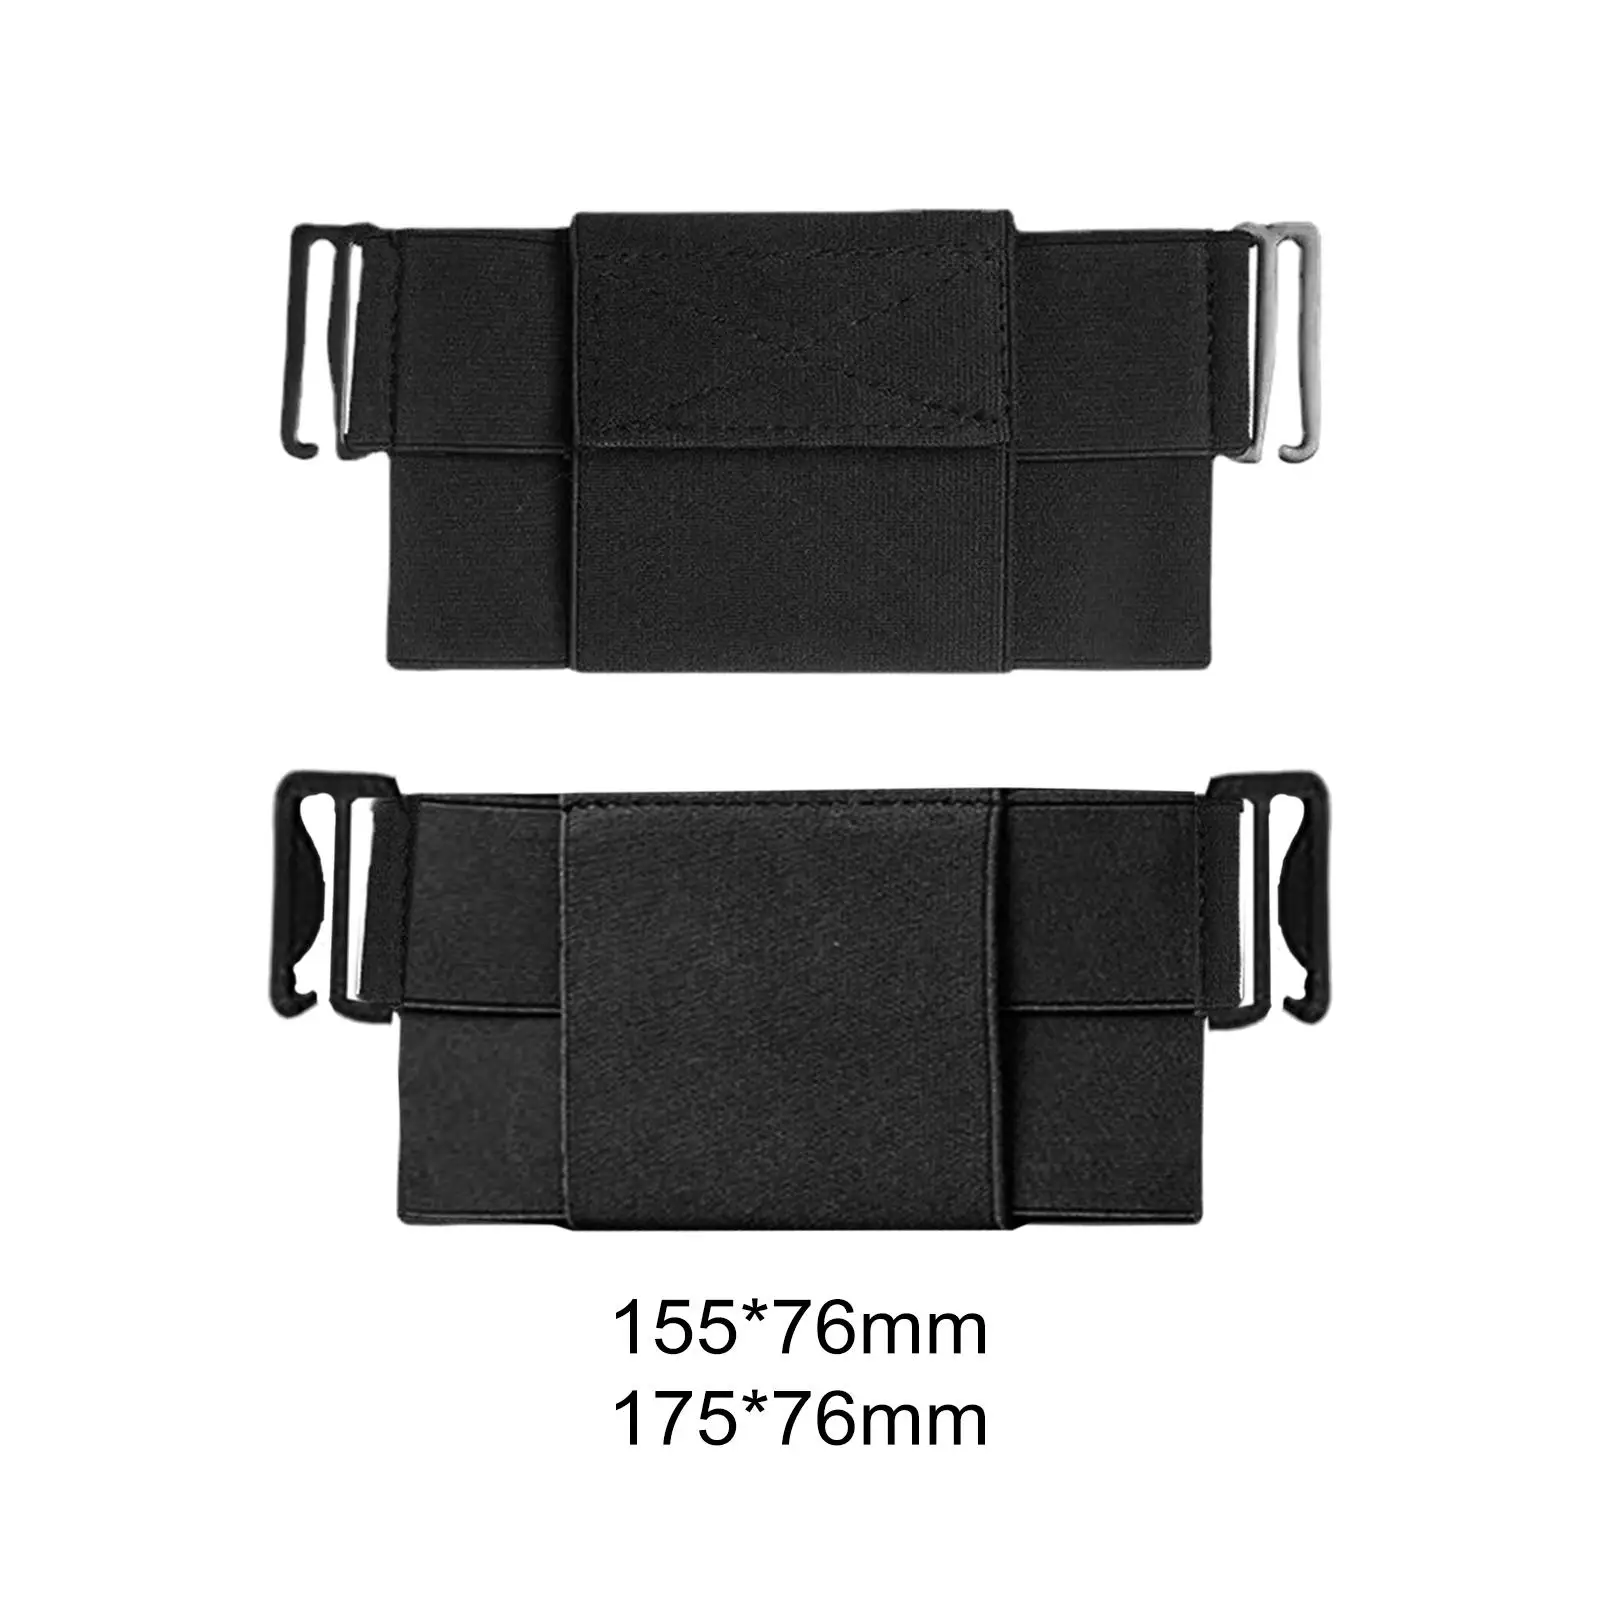 Invisible Wallet Waist Bag with Clips Phone Holder Compact Utility Belt Pouch for Workout Hunting Walking Outdoor Sports